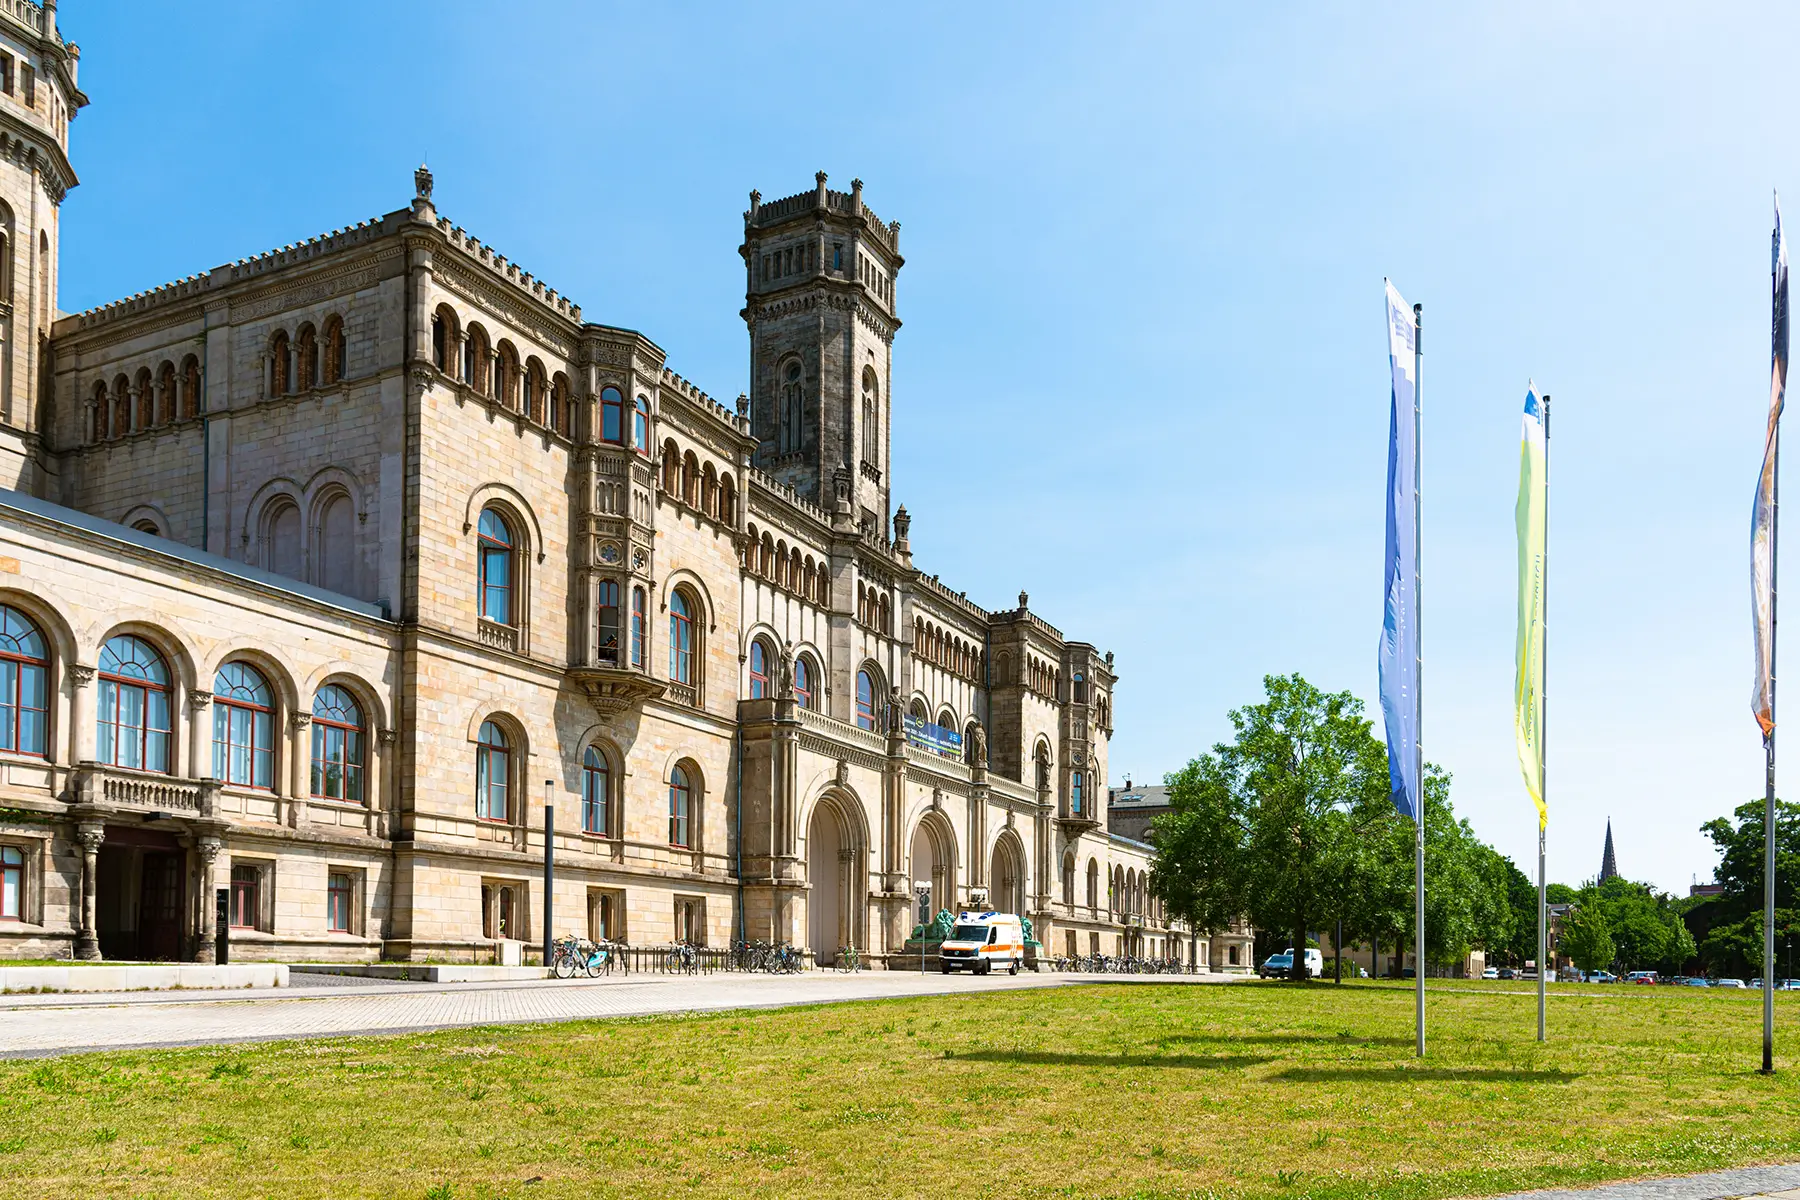 A building at Leibniz University in Hannover